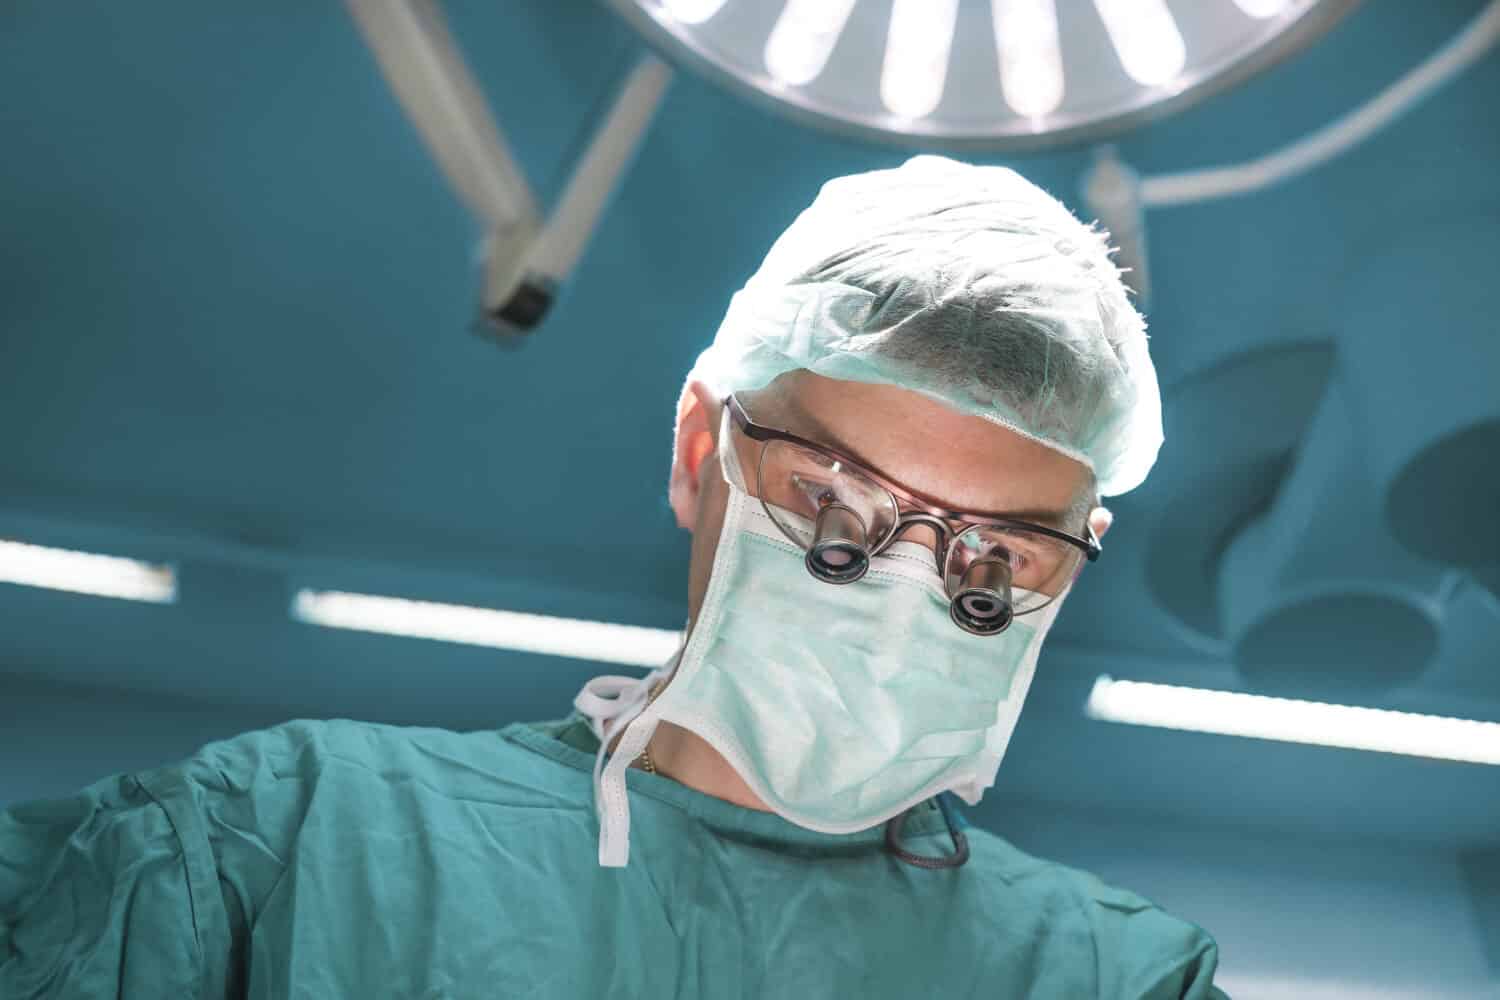 Portrait of a surgeon with magnification glass during the open heart procedure in operating room